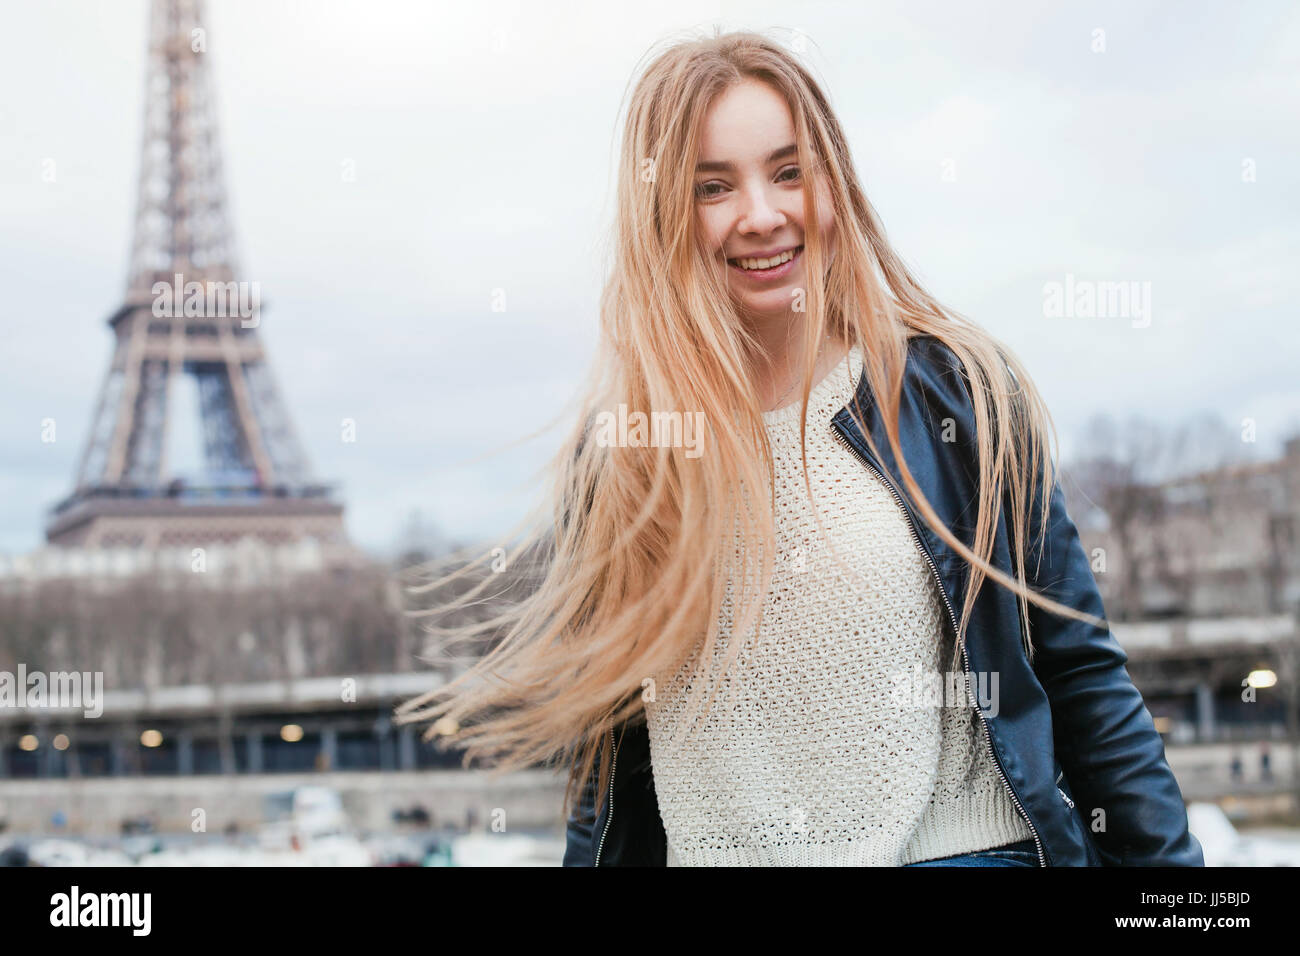 Premium Photo  Holidays in paris back view of beautiful fashion girl  enjoying view of eiffel tower in paris france summer vacation in europe